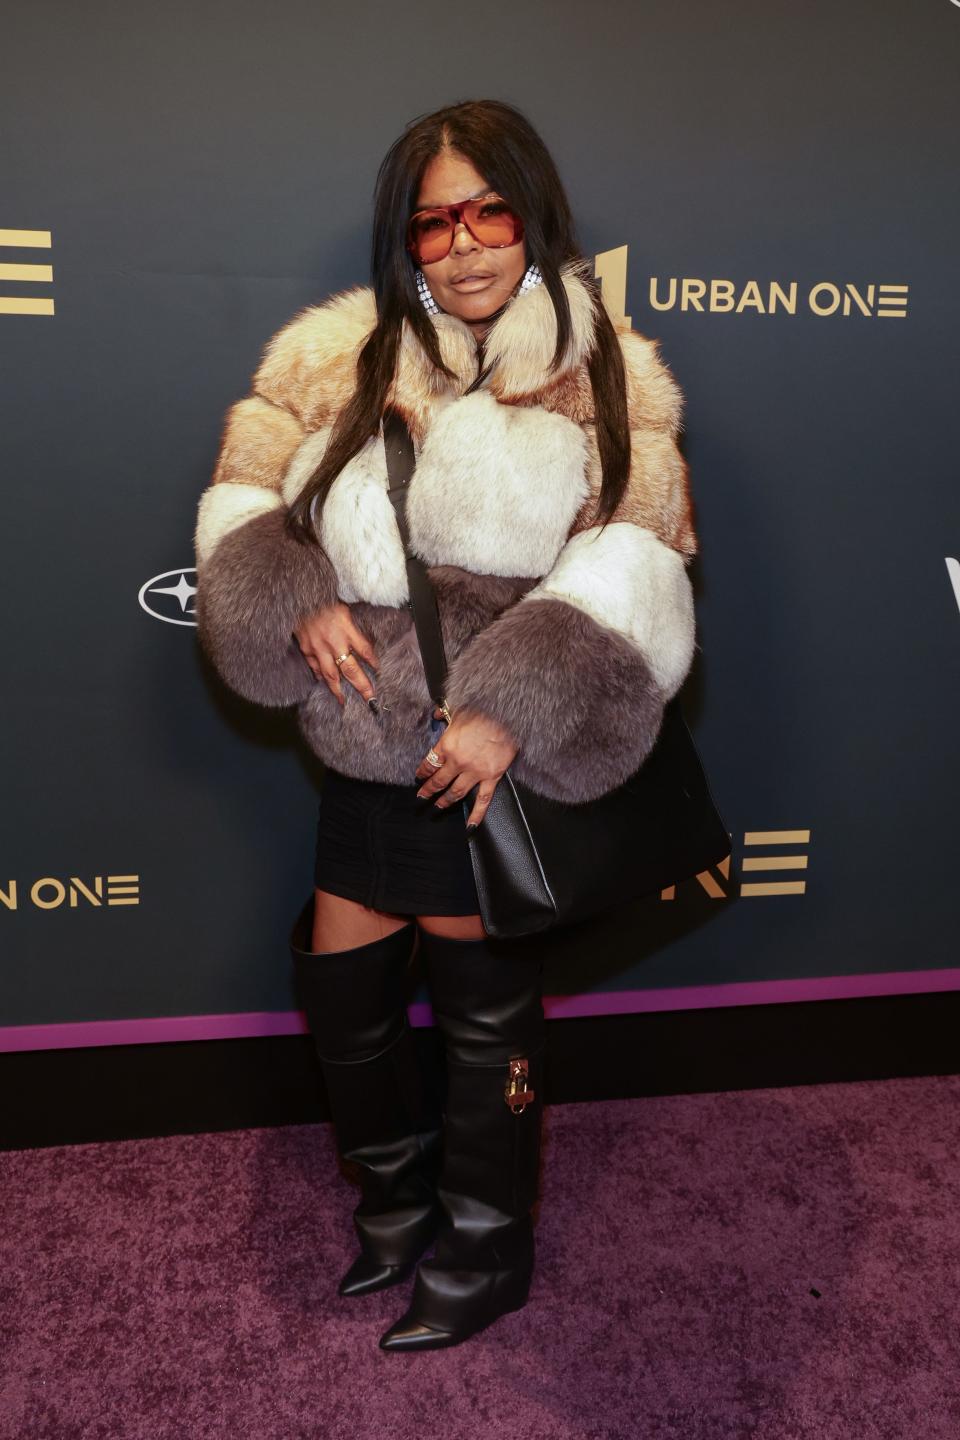 Fashion designer Misa Hylton, the ex-girlfriend of rapper Sean "Diddy" Combs and mom of his middle son Justin Combs, is speaking out about the now-surfaced hotel footage of the media mogul assaulting another ex-girlfriend, Casandra "Cassie" Ventura Fine.